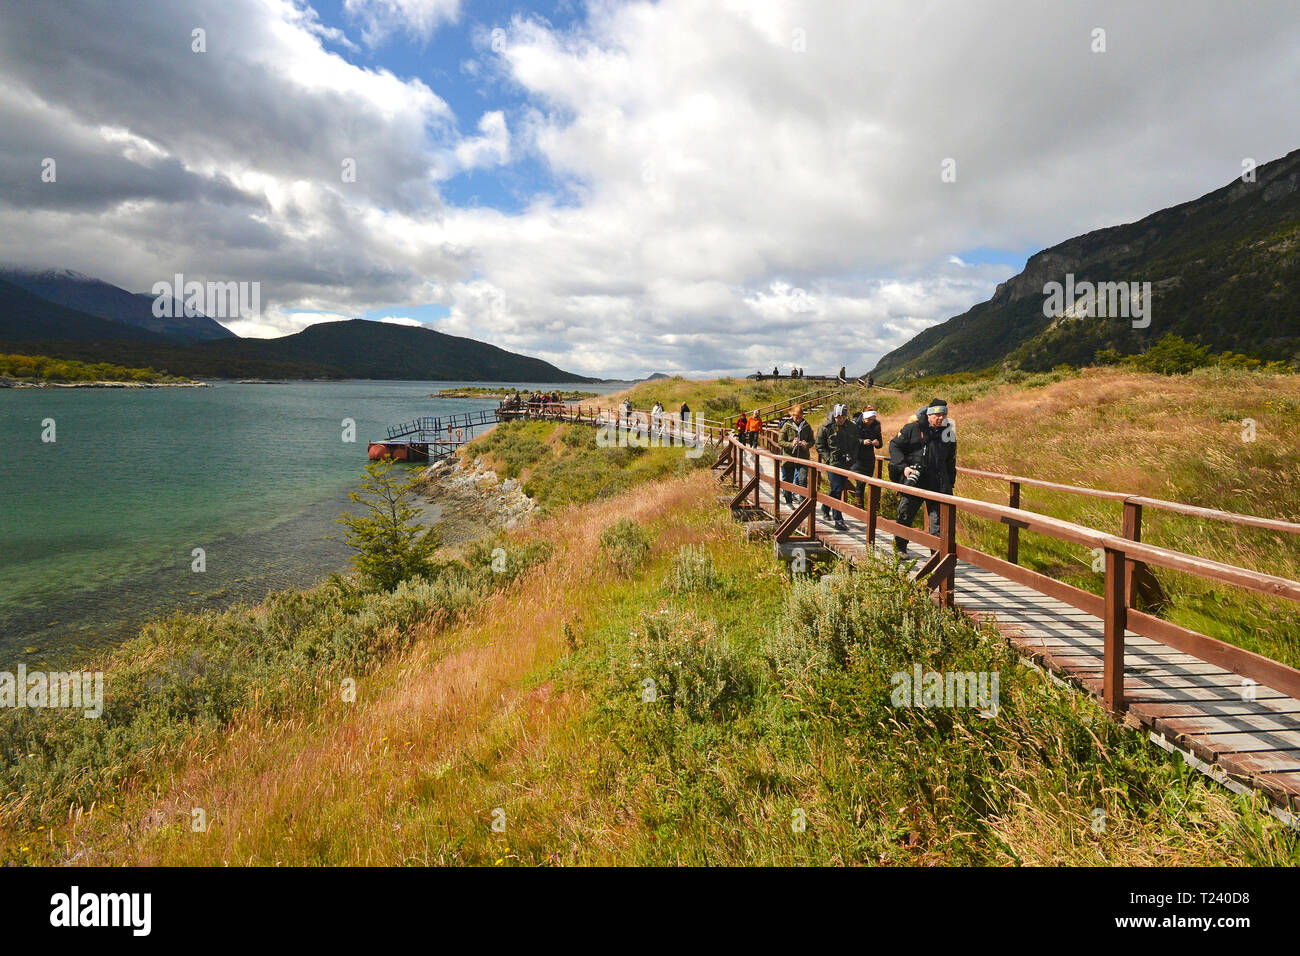 Tourists at Fireland, National park Tierra del Fuego, Argentina Stock Photo